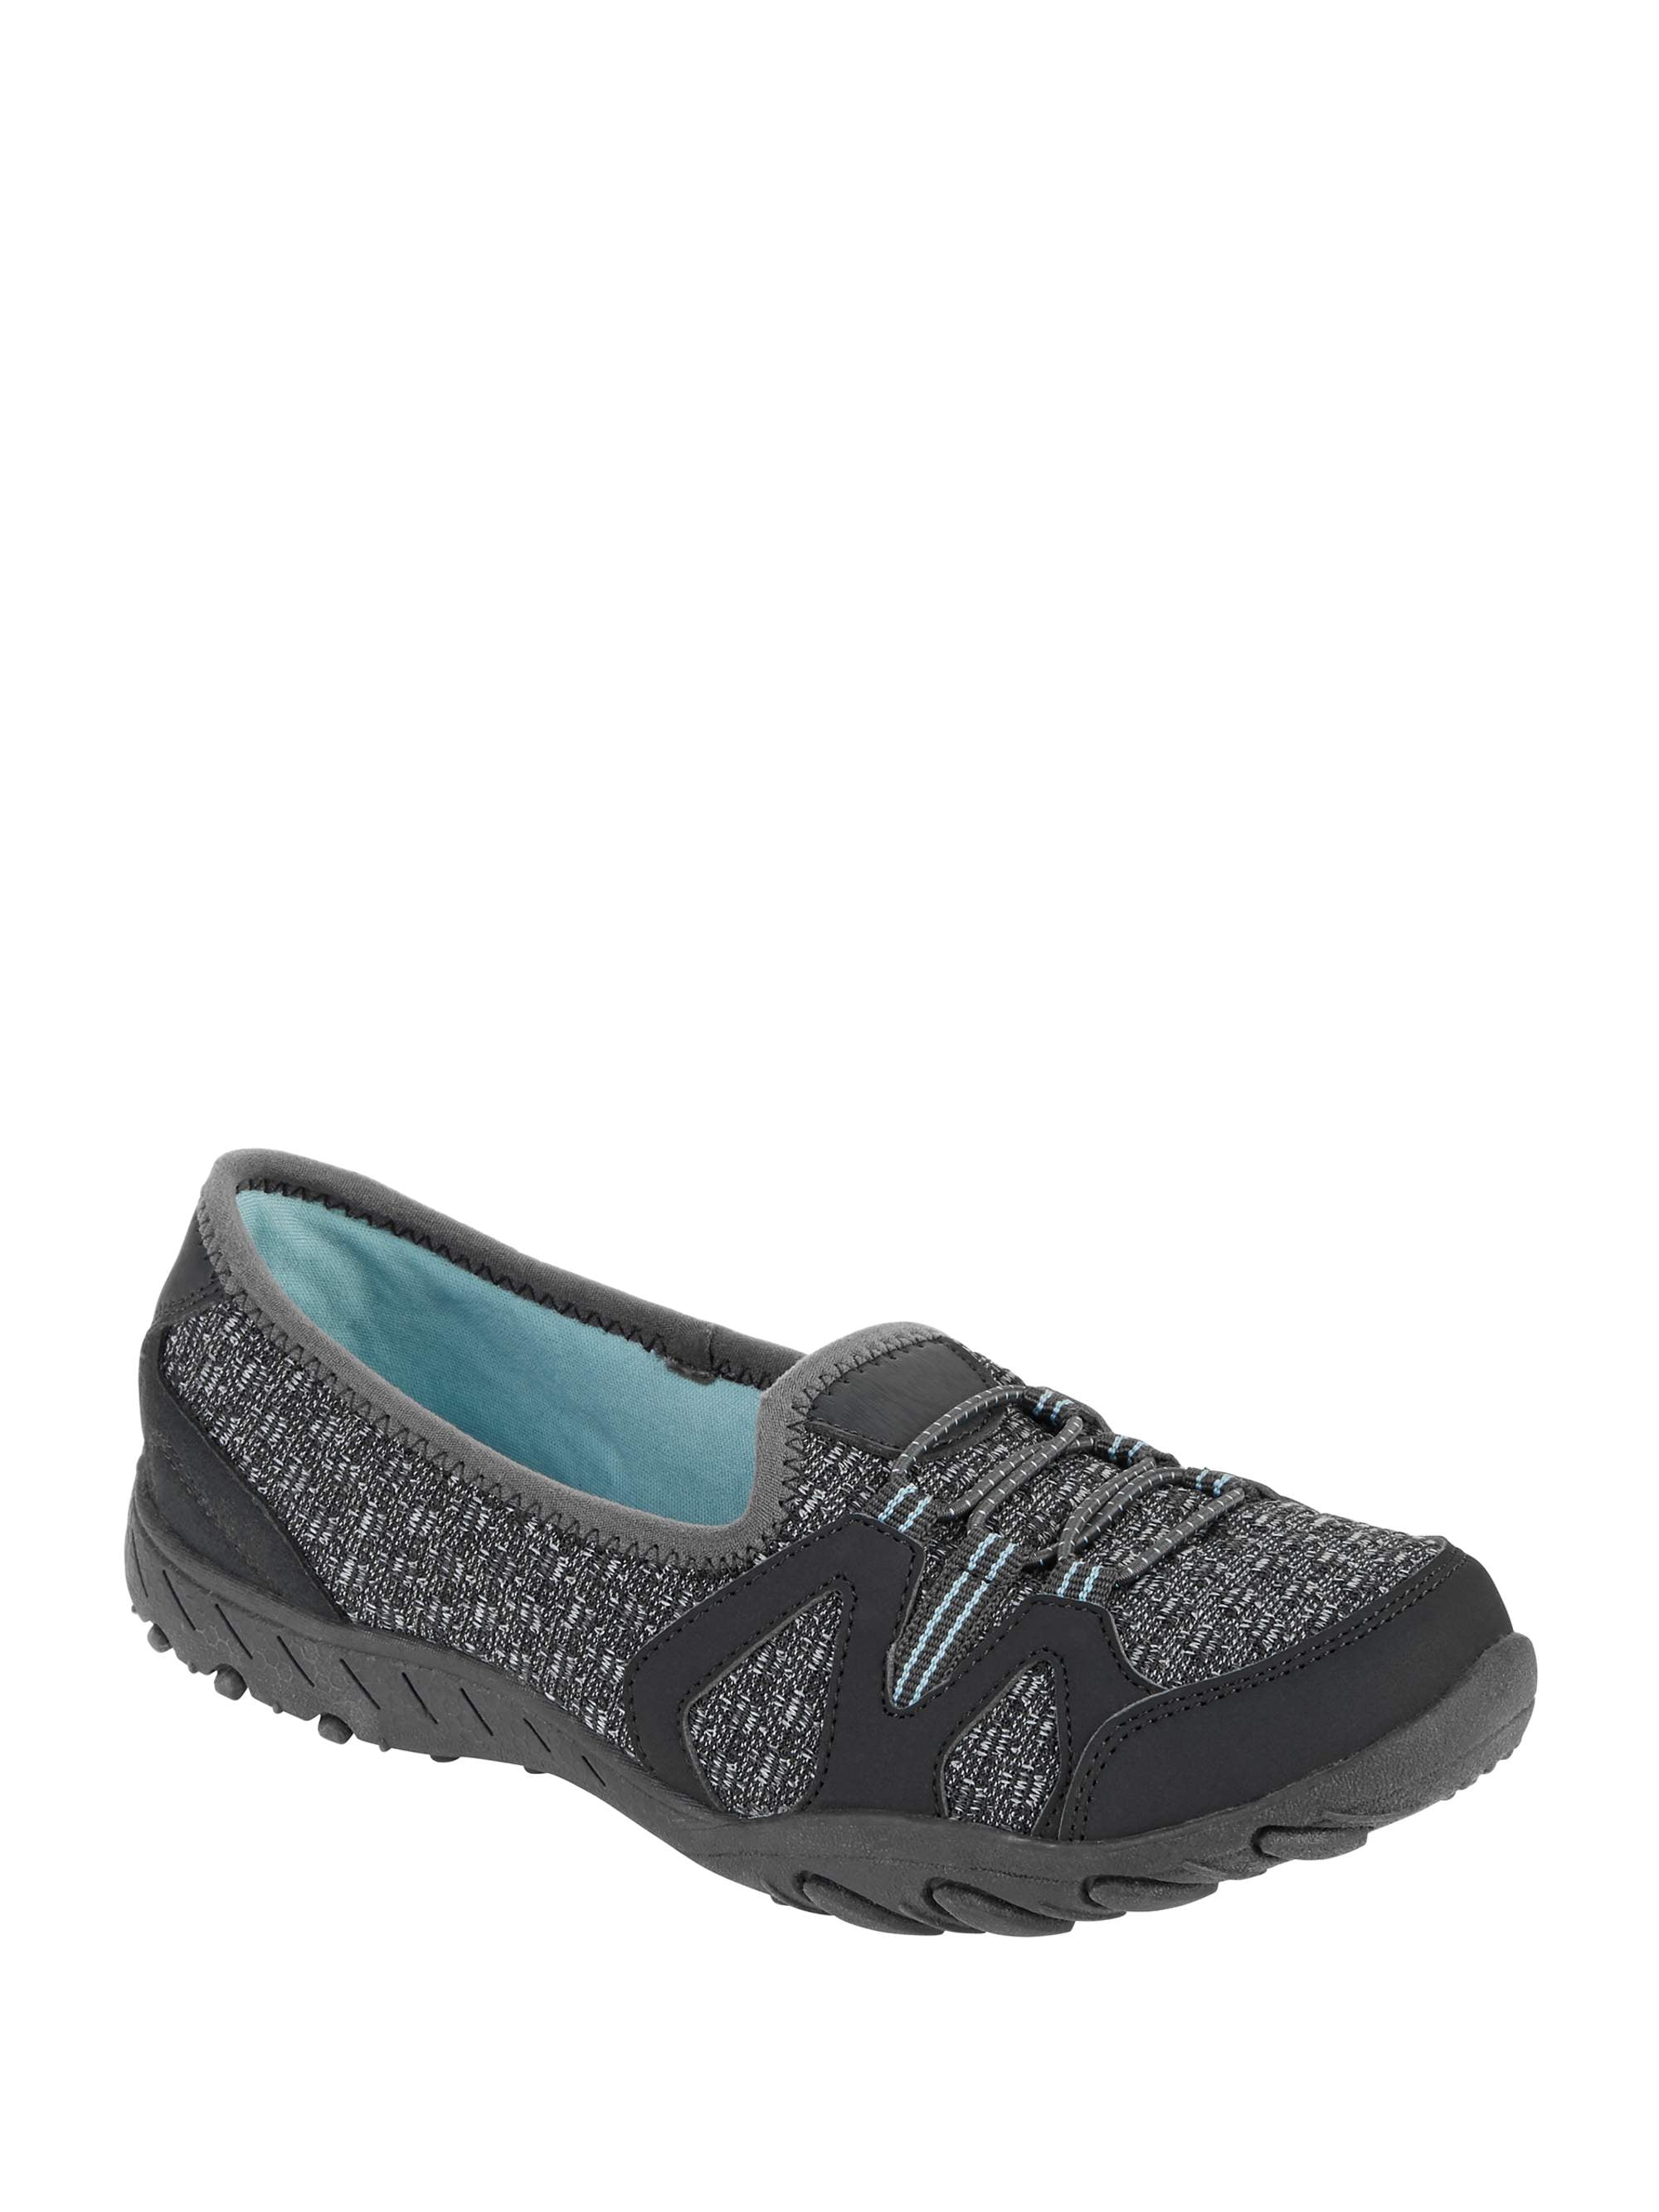 athletic works women's low bungee shoe